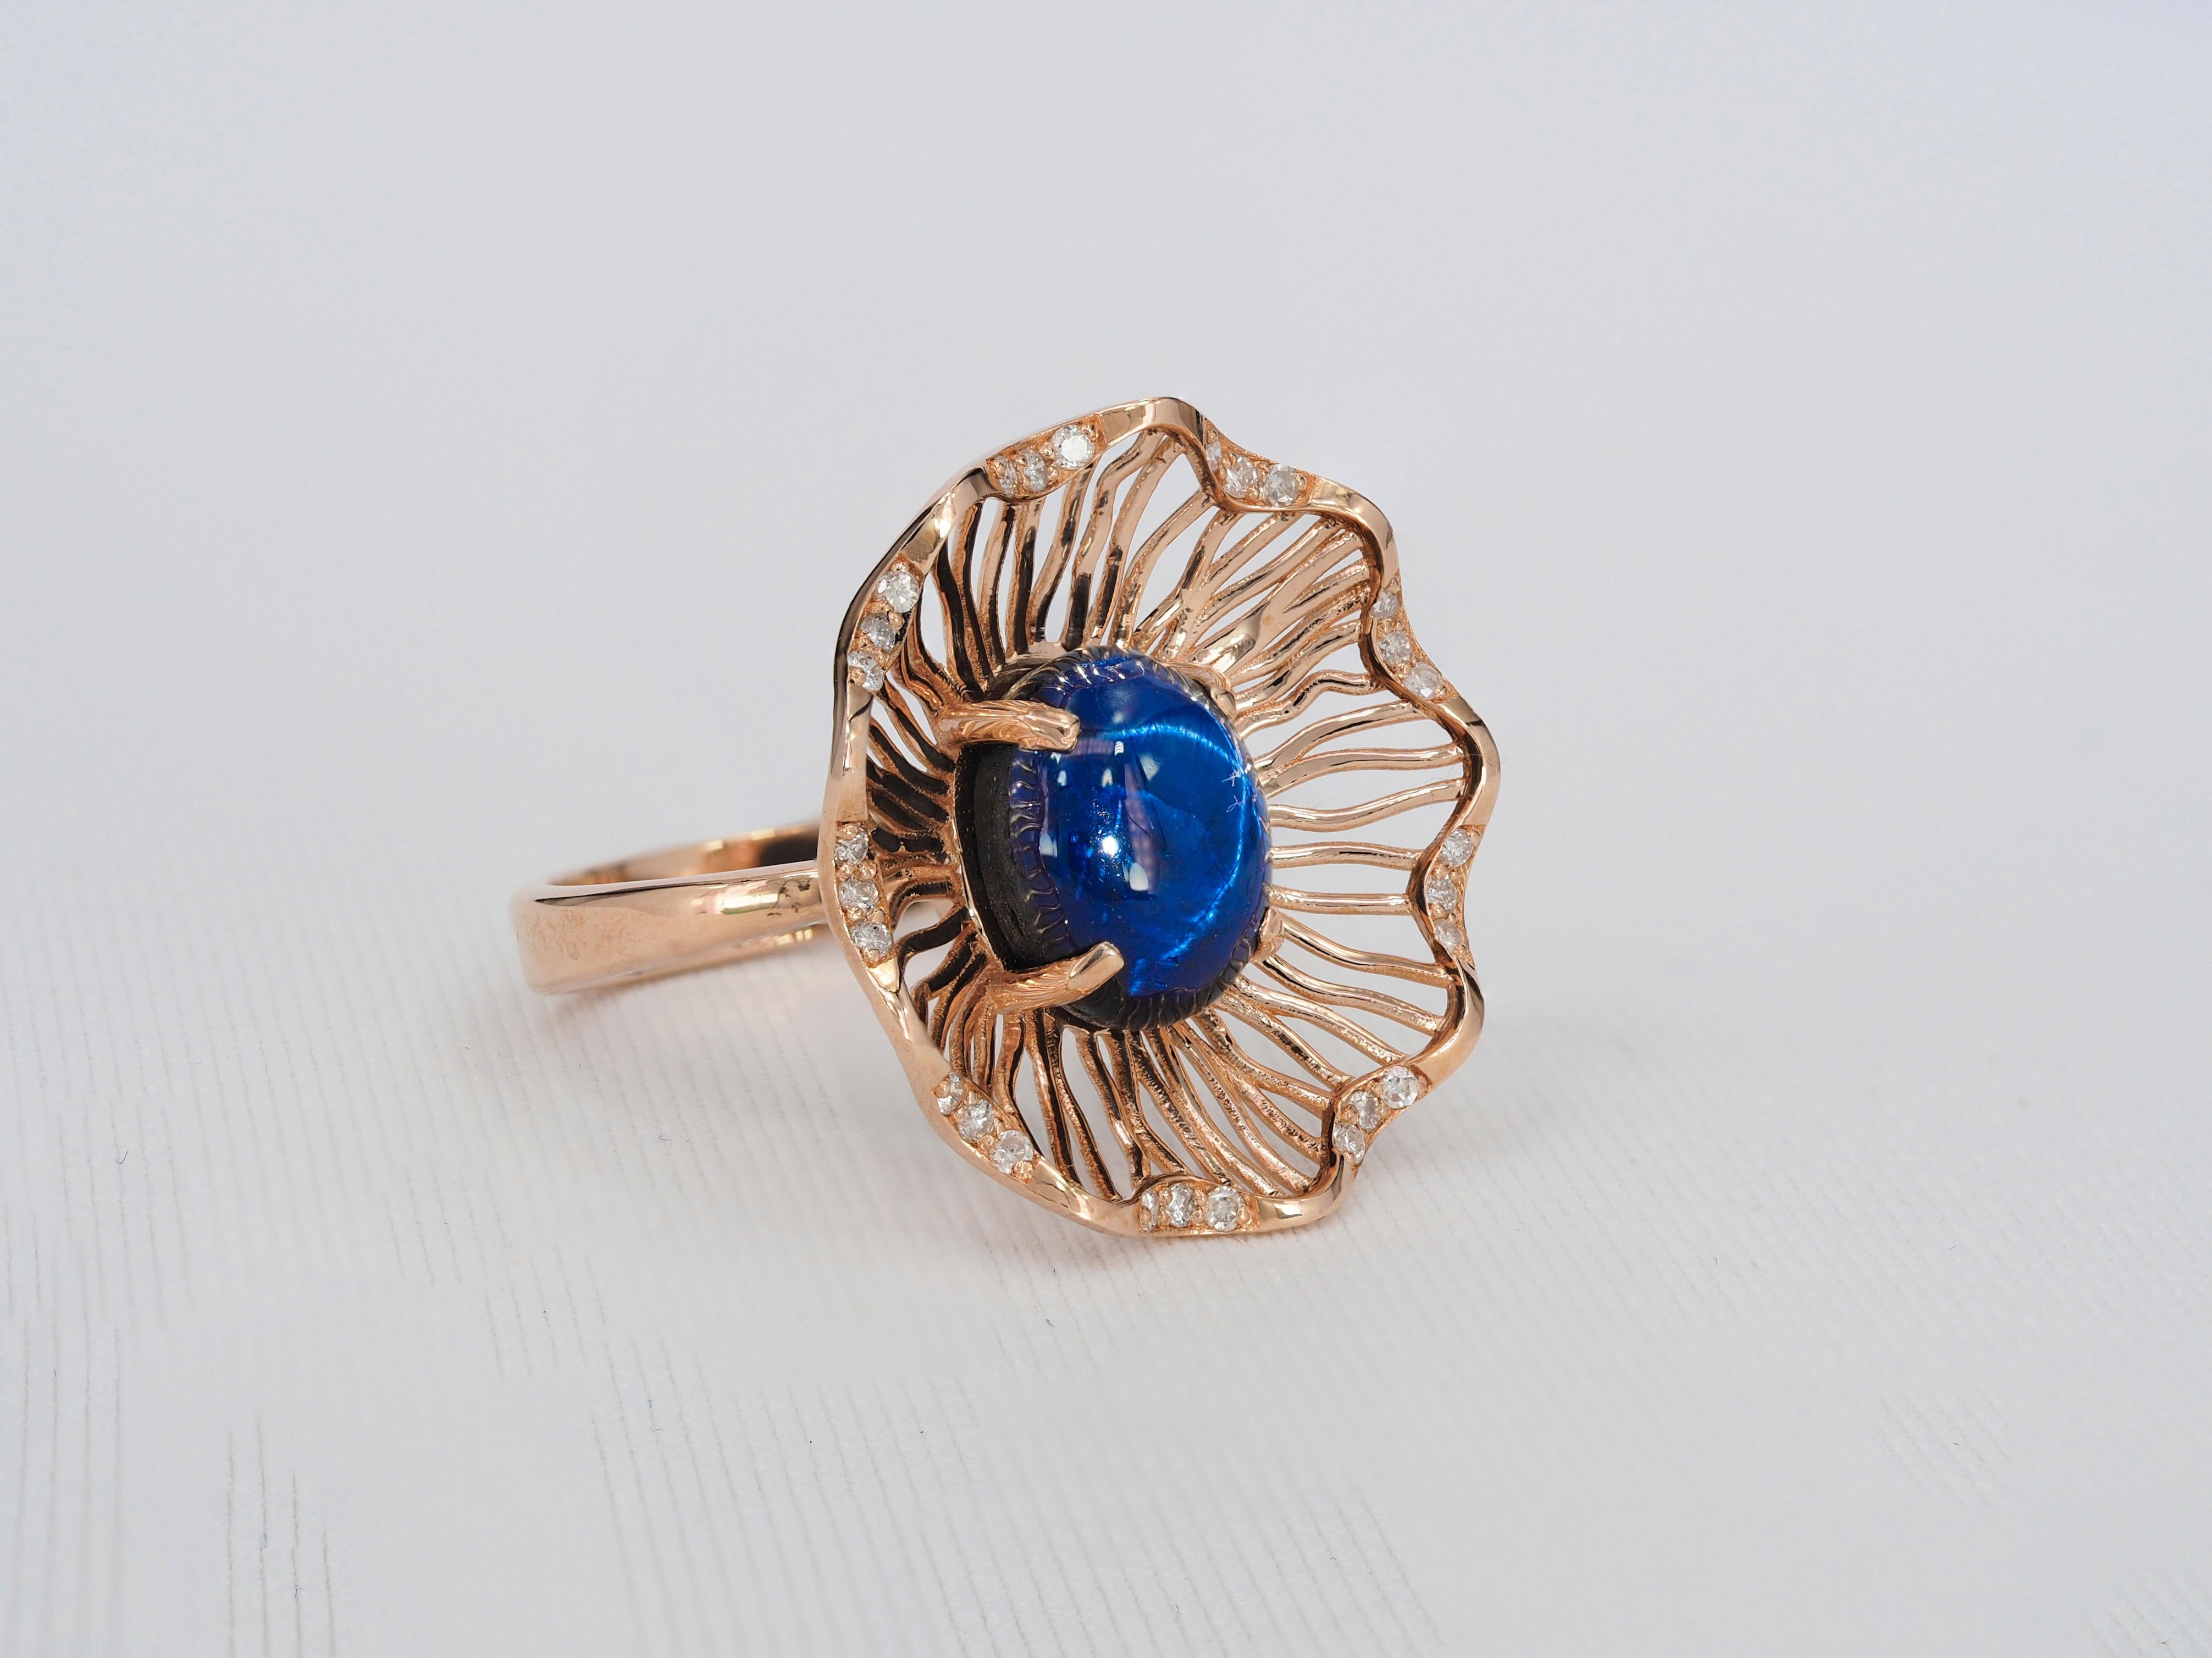 Cabochon Oval cabochon sapphire 14k gold ring.  For Sale